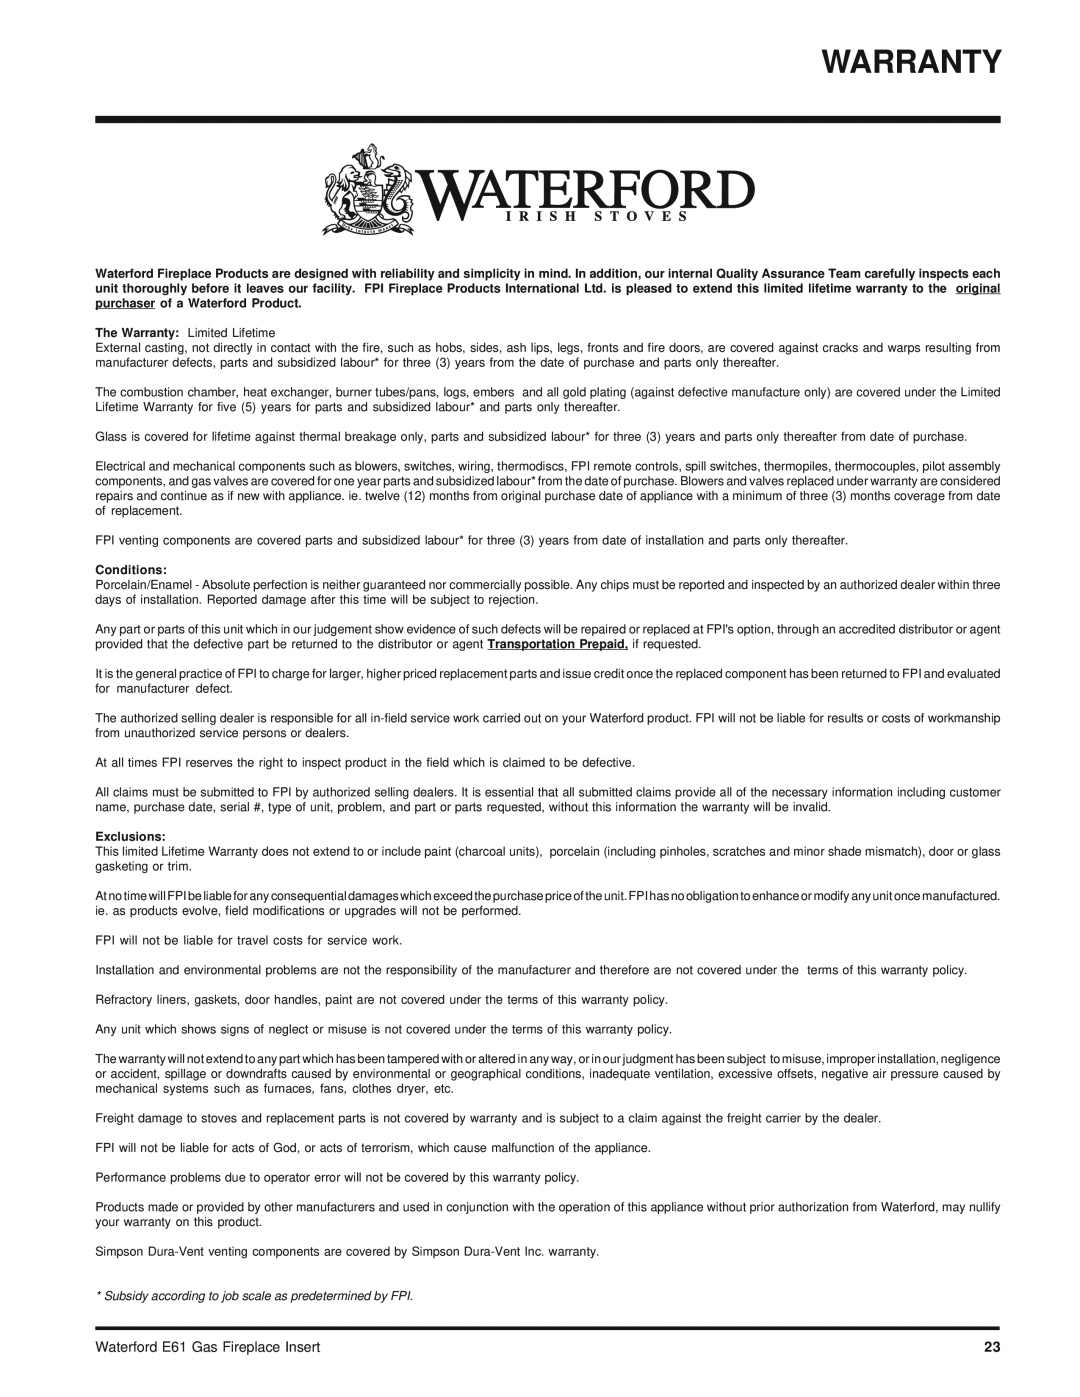 Waterford Appliances E61-LP, E61-NG installation manual Warranty, Conditions, Exclusions 